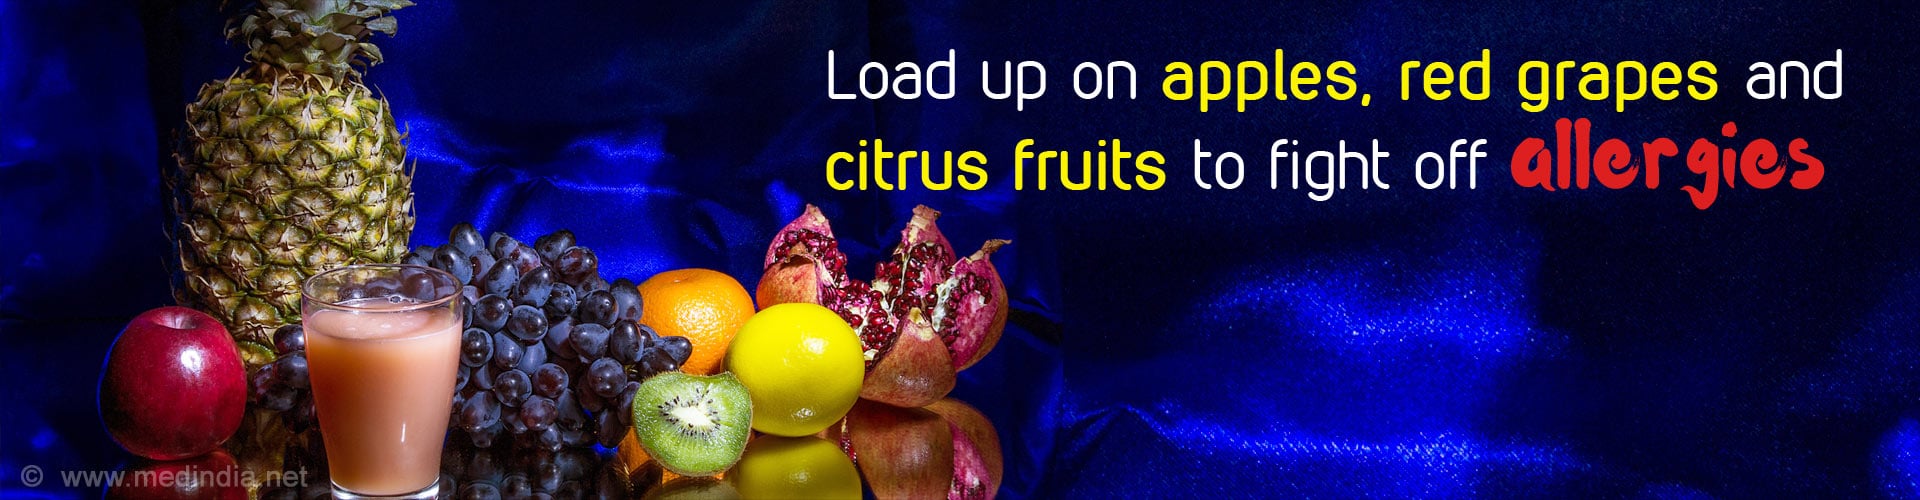 Load up on apples, red grapes, and citrus fruits to fight off allergies. 